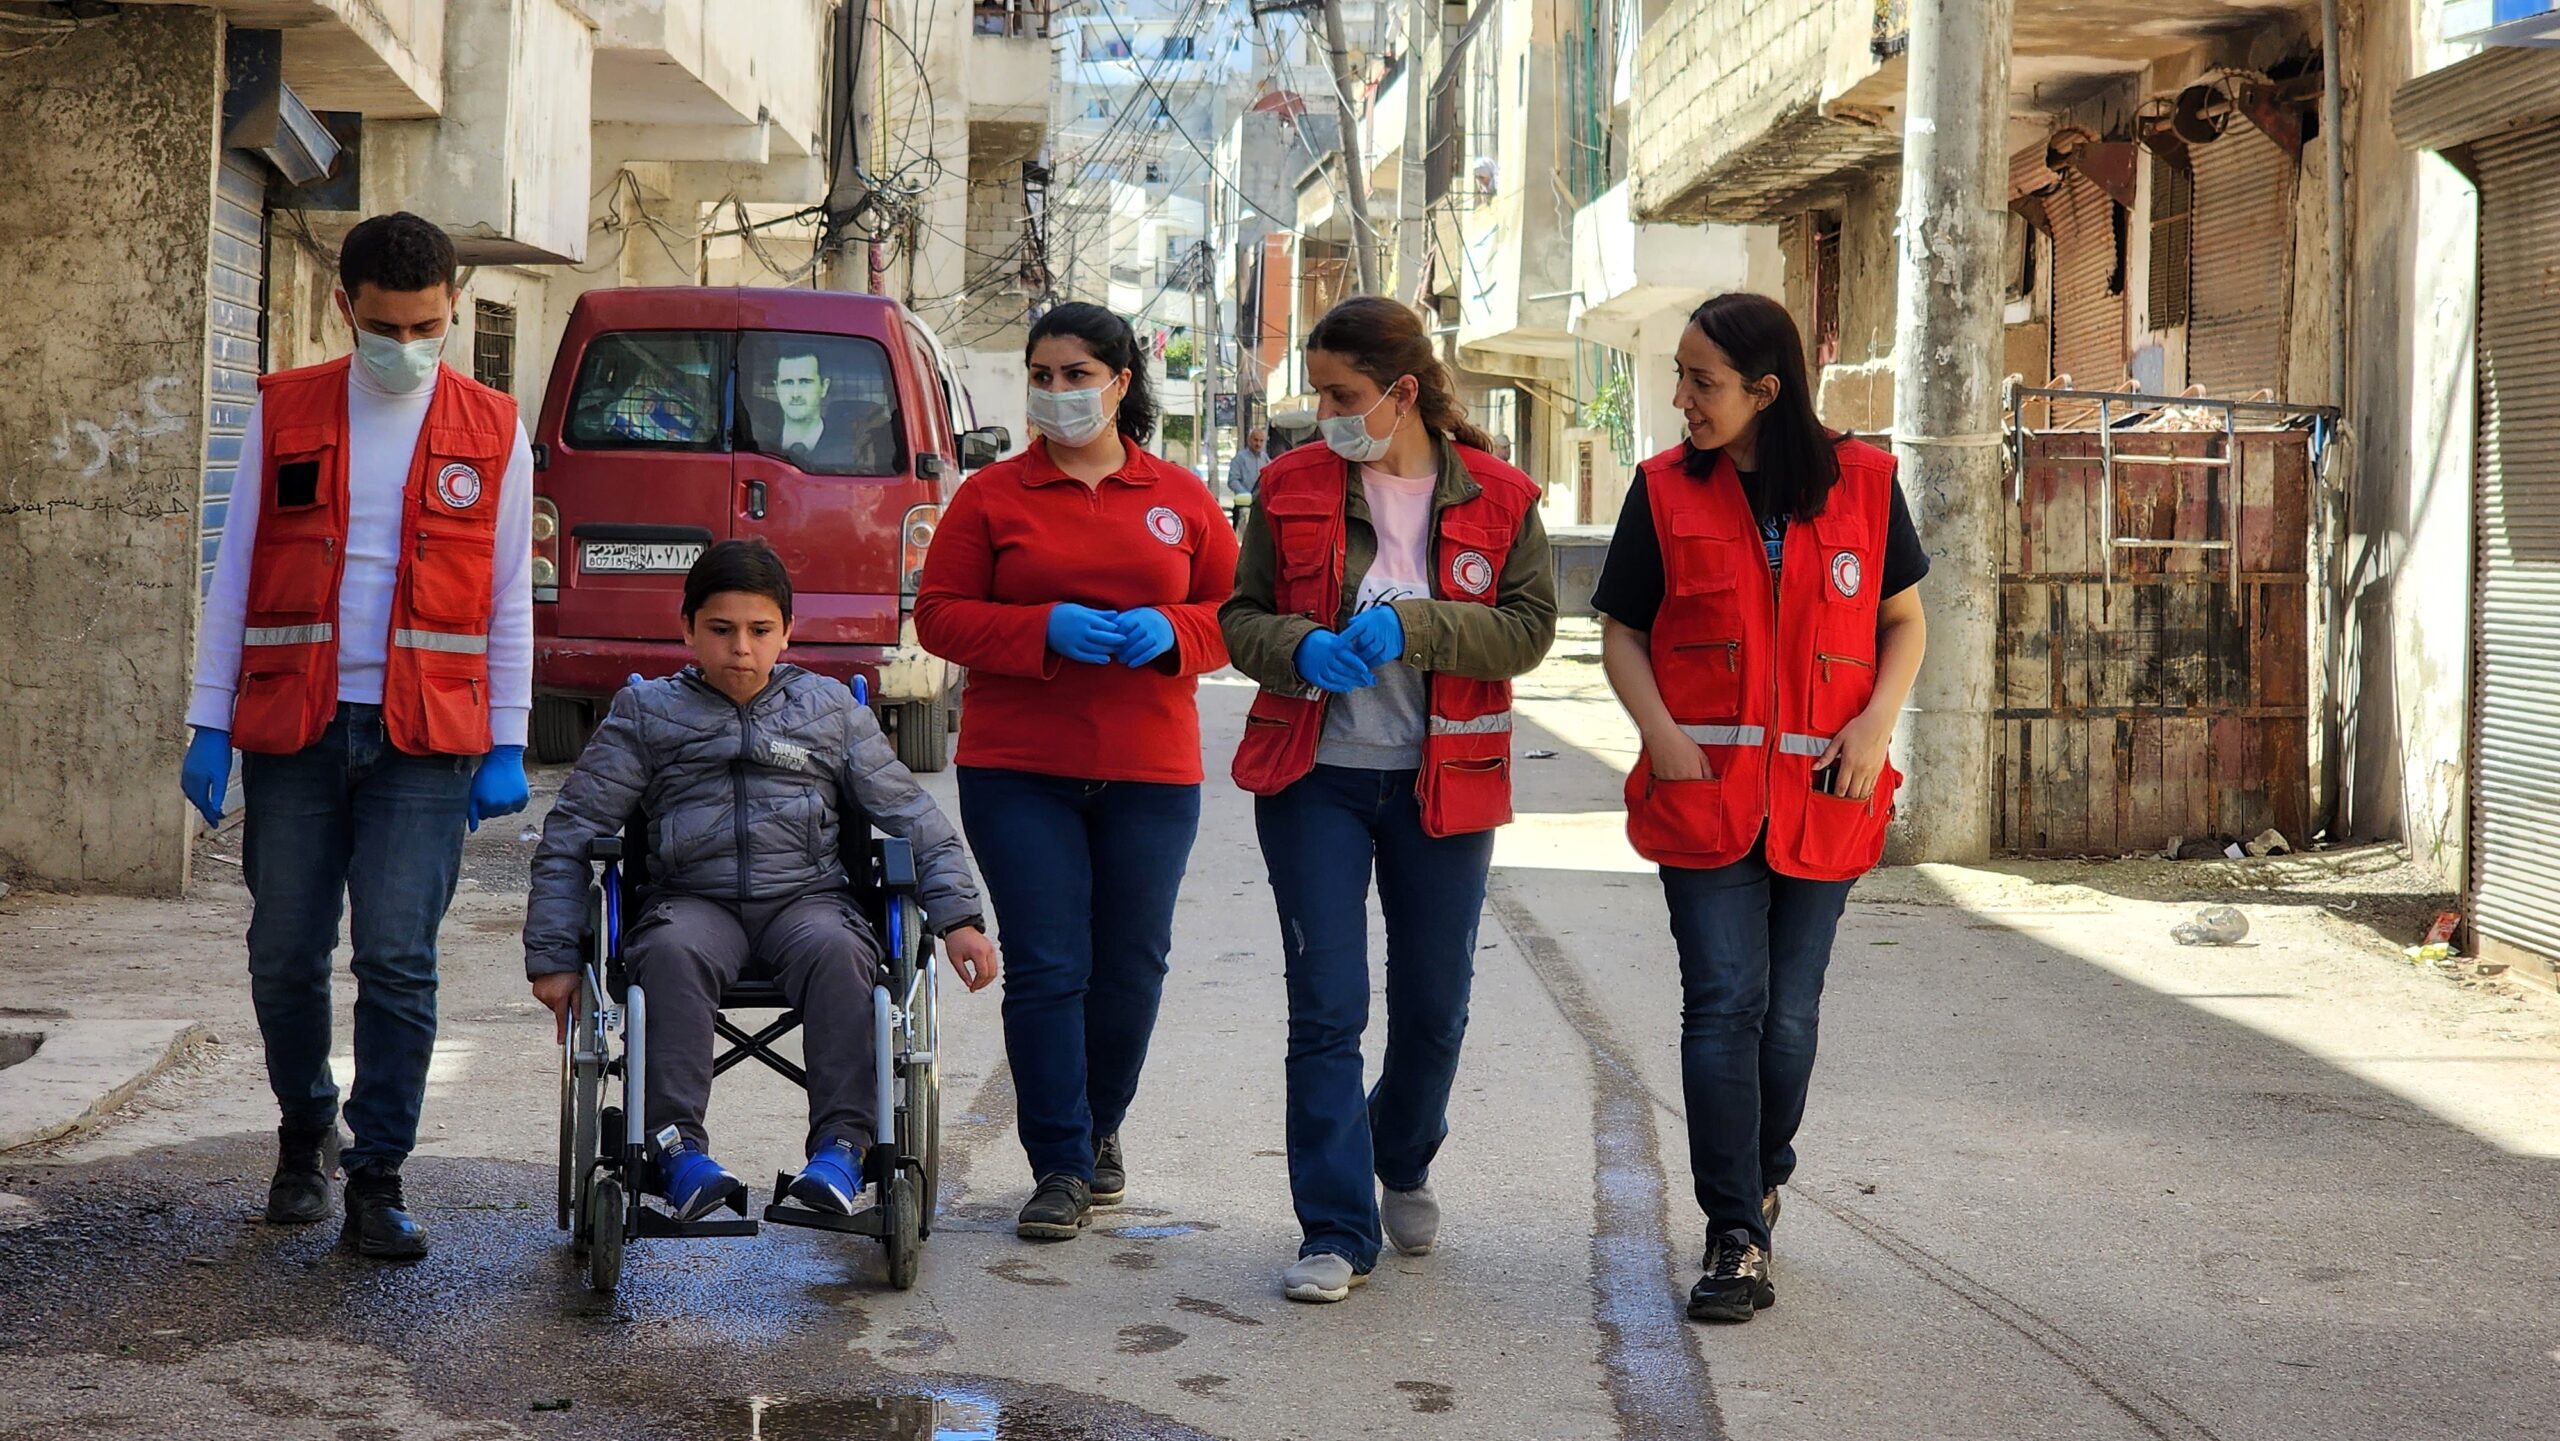 Red Cross workers wearing red vests and masks provide assistance to a young boy in a wheelchair on a damaged street lined with dilapidated buildings and exposed wires, illustrating humanitarian relief efforts after the 2023 earthquake in Syria